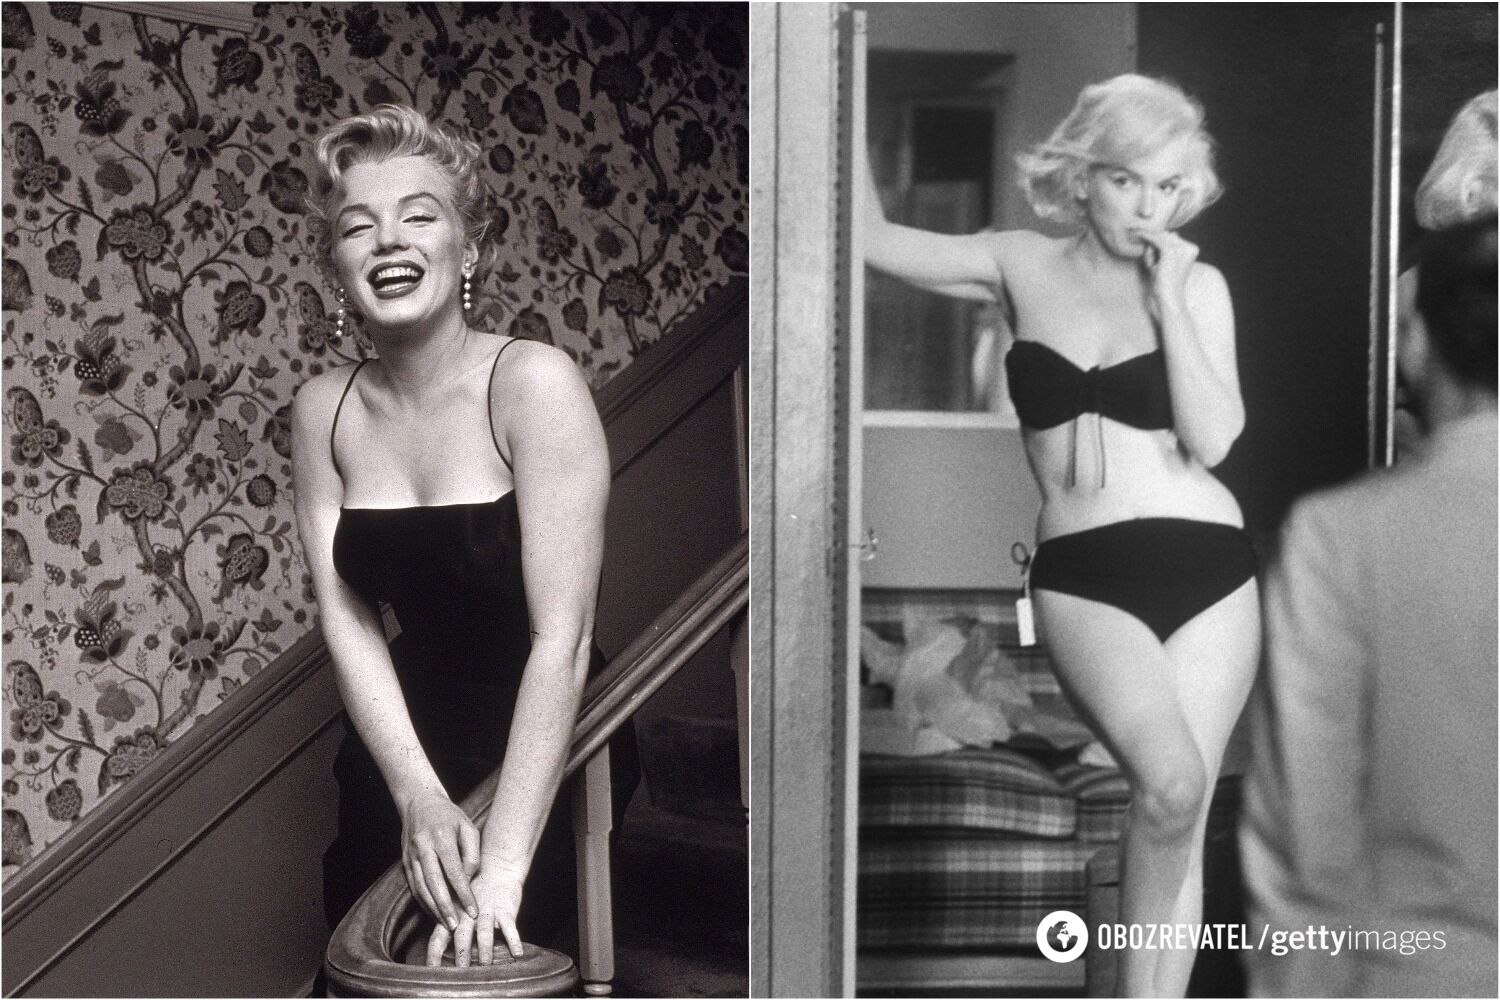 Lesia Nikitiuk dressed as Marilyn Monroe: what are the secrets of success and seduction of the most famous blonde and sex symbol of the 1950s